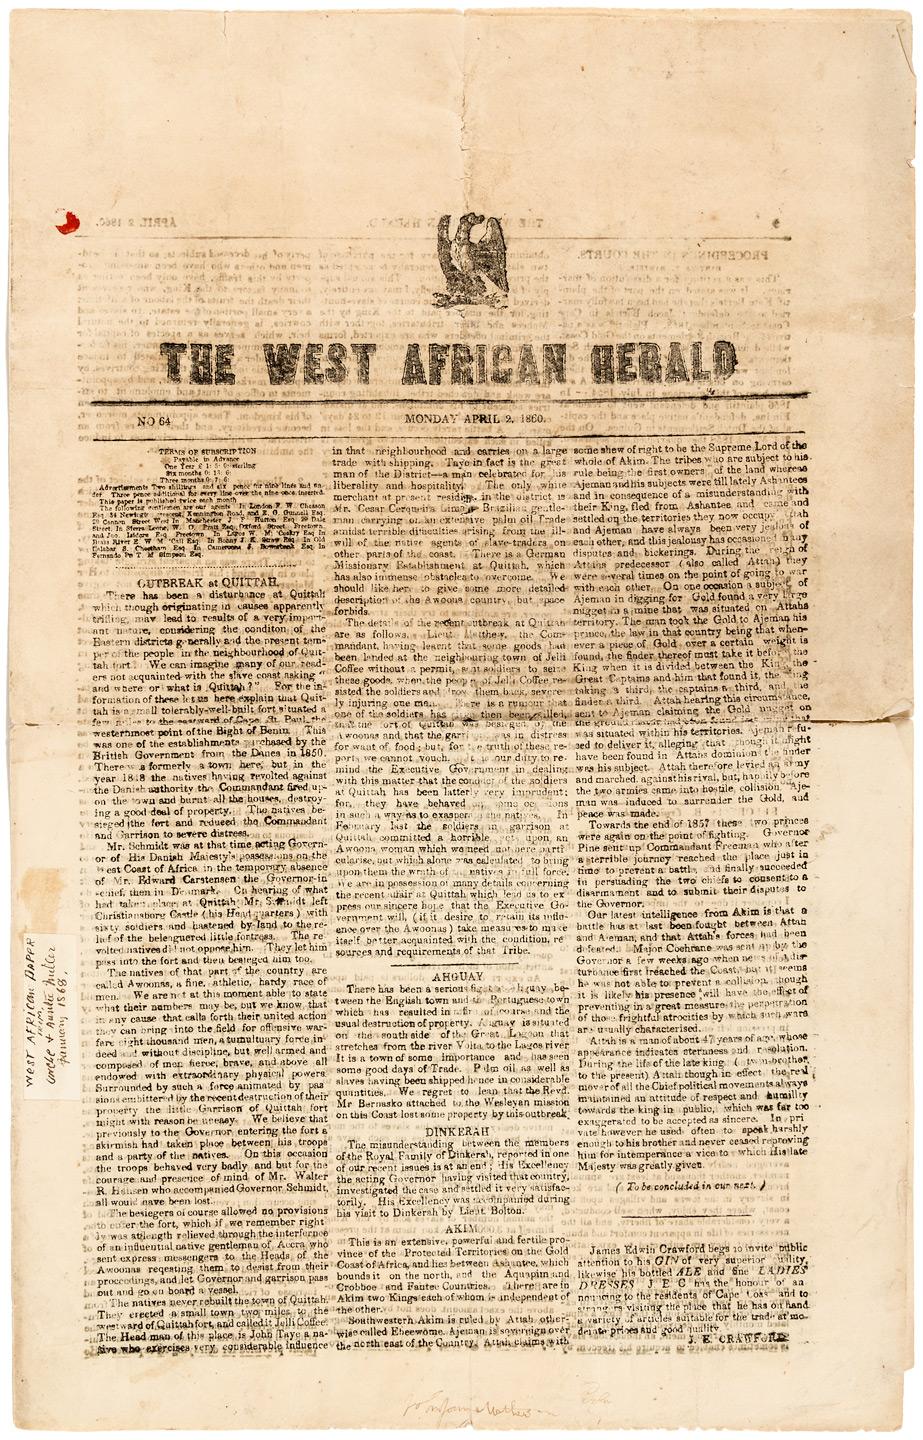 The West African Herald, April 2, 1860 (Oldest Black-Owned Newspaper in Africa)